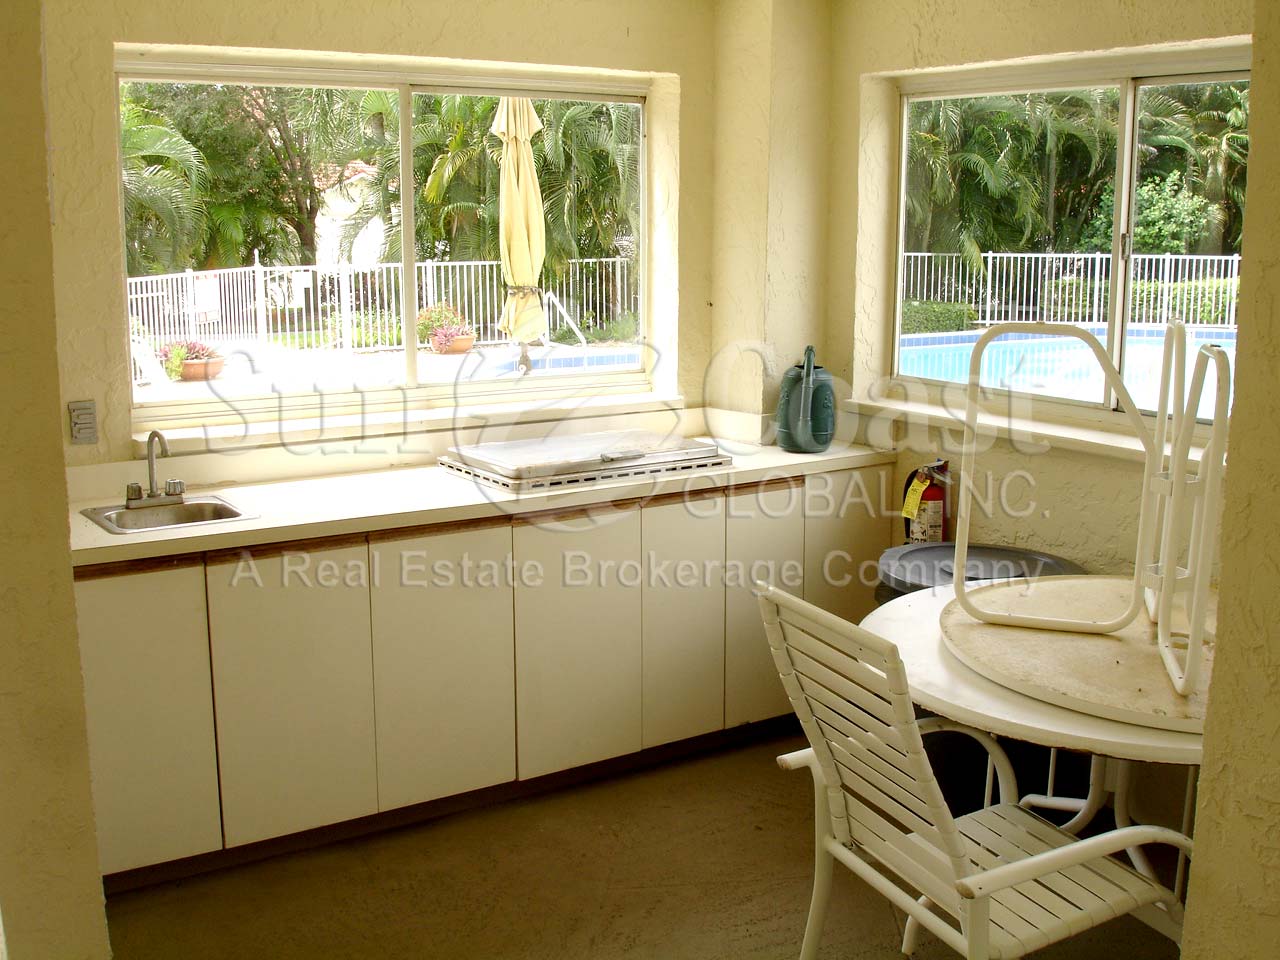 Open clubhouse with no screens, no kitchen facilities, small sink, no airconditioning